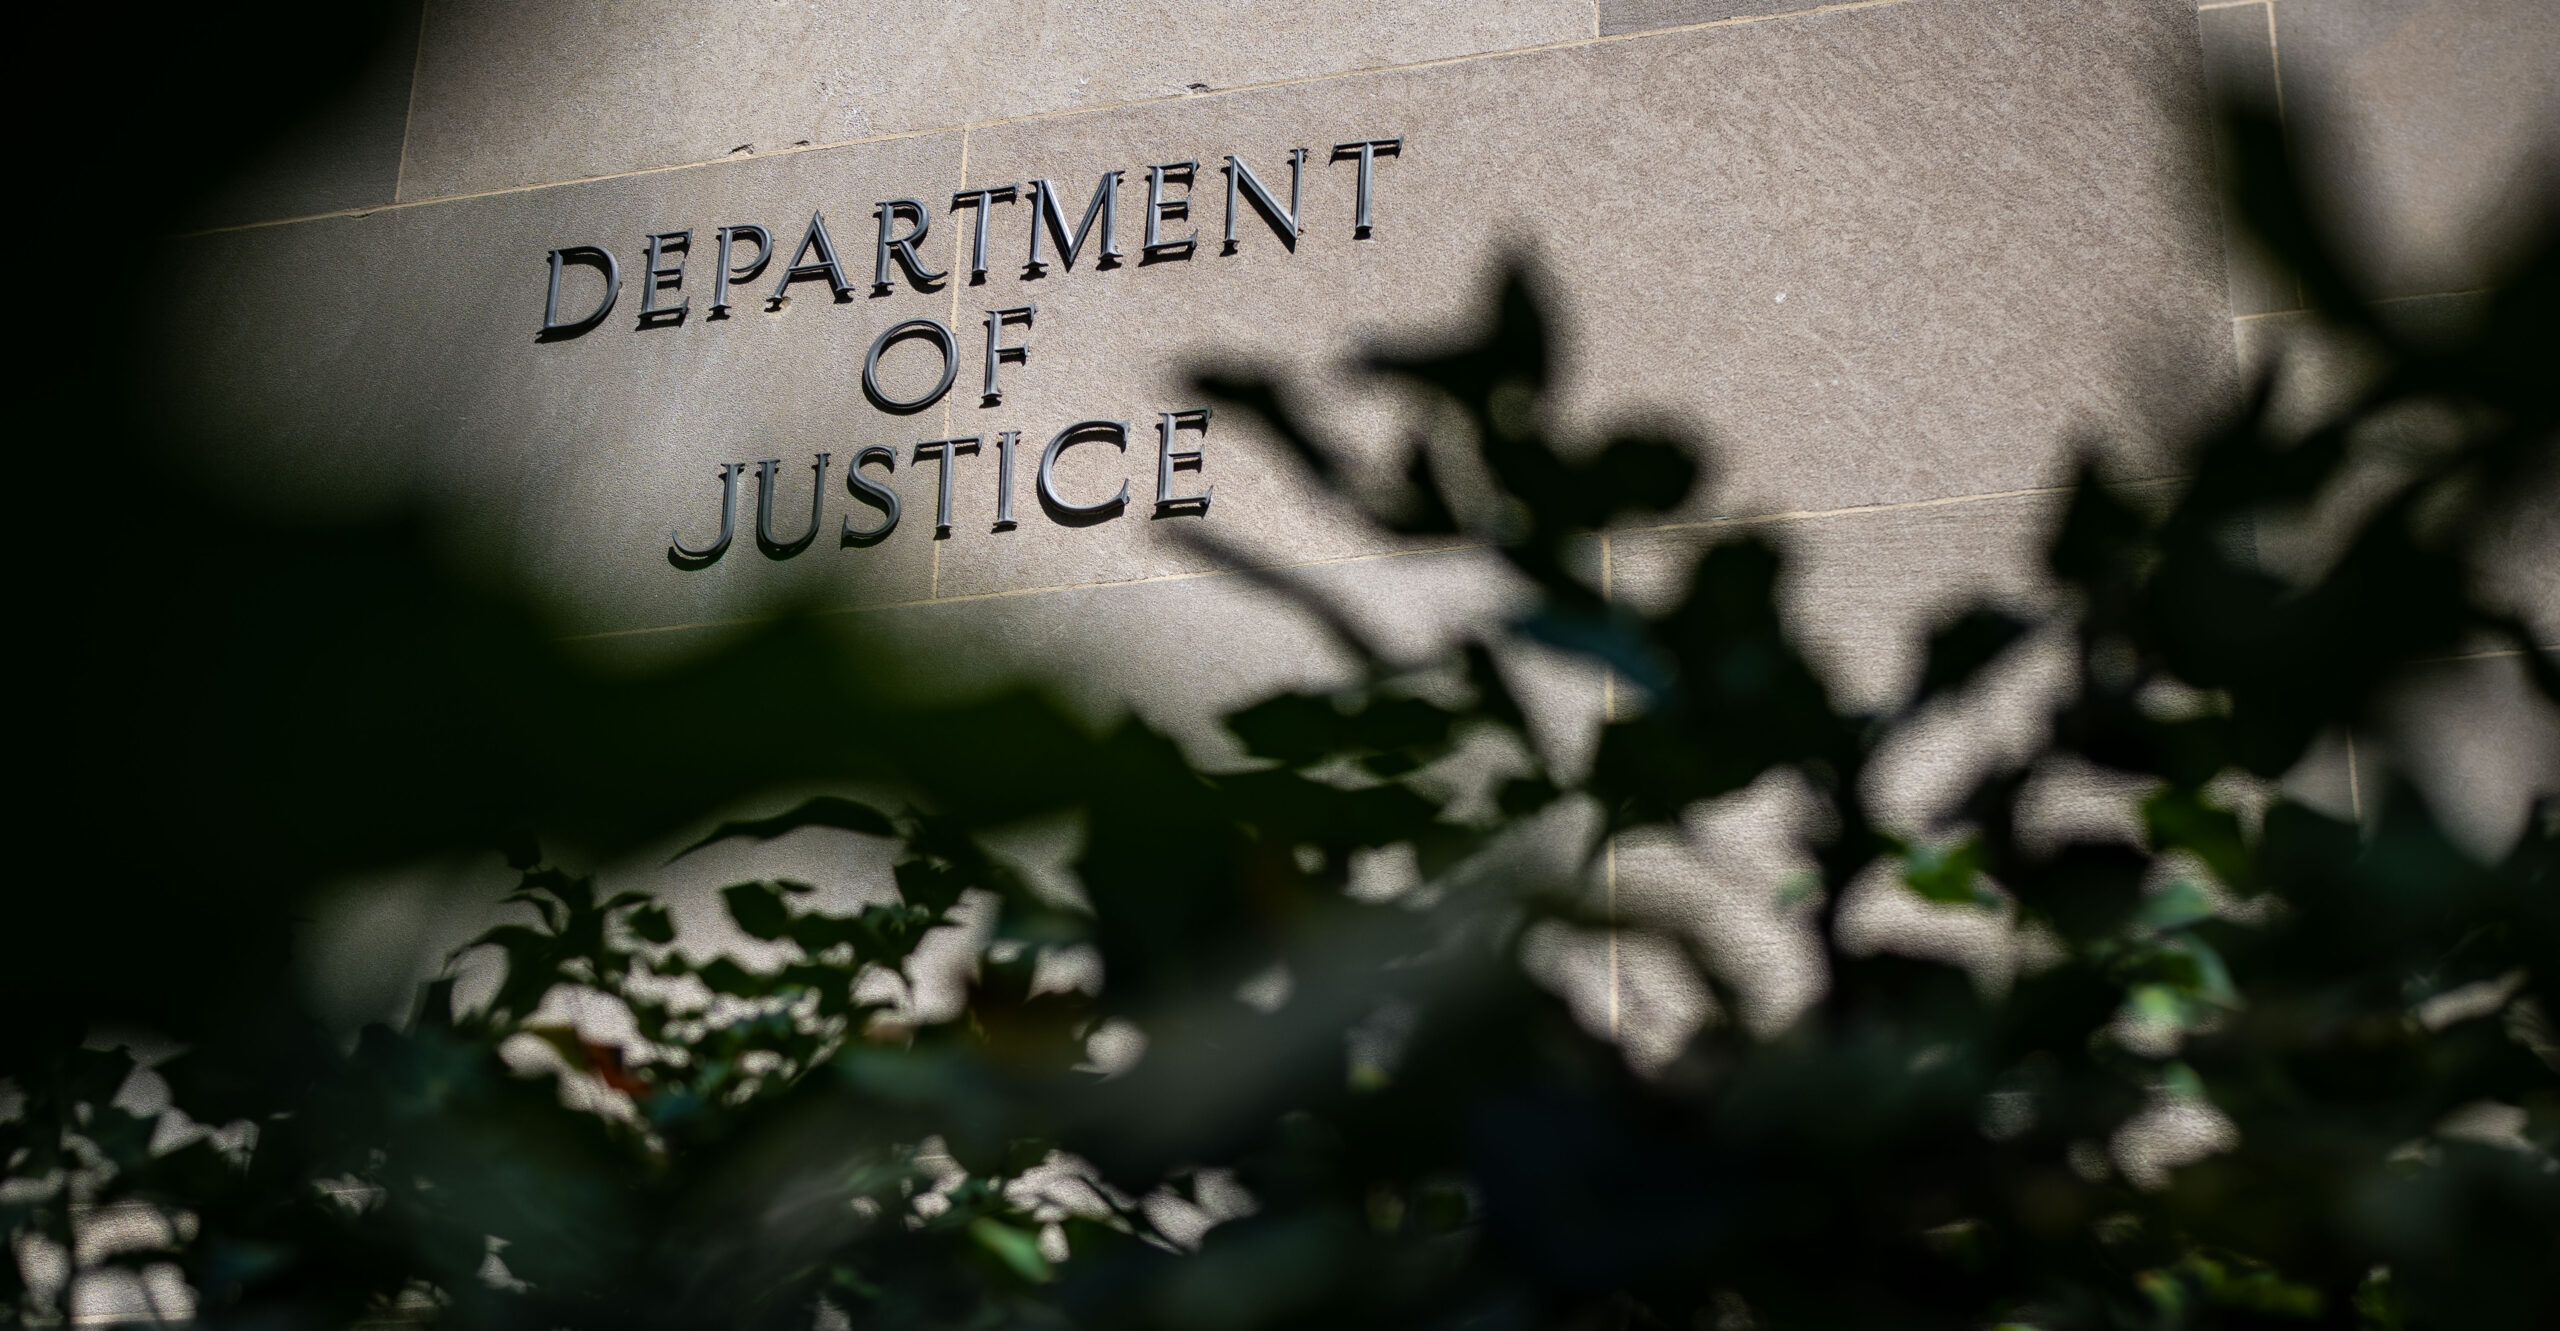 EXCLUSIVE: DOJ Advised DC Medical Examiner to Dispose of Aborted Baby Bodies, Lawyer Says